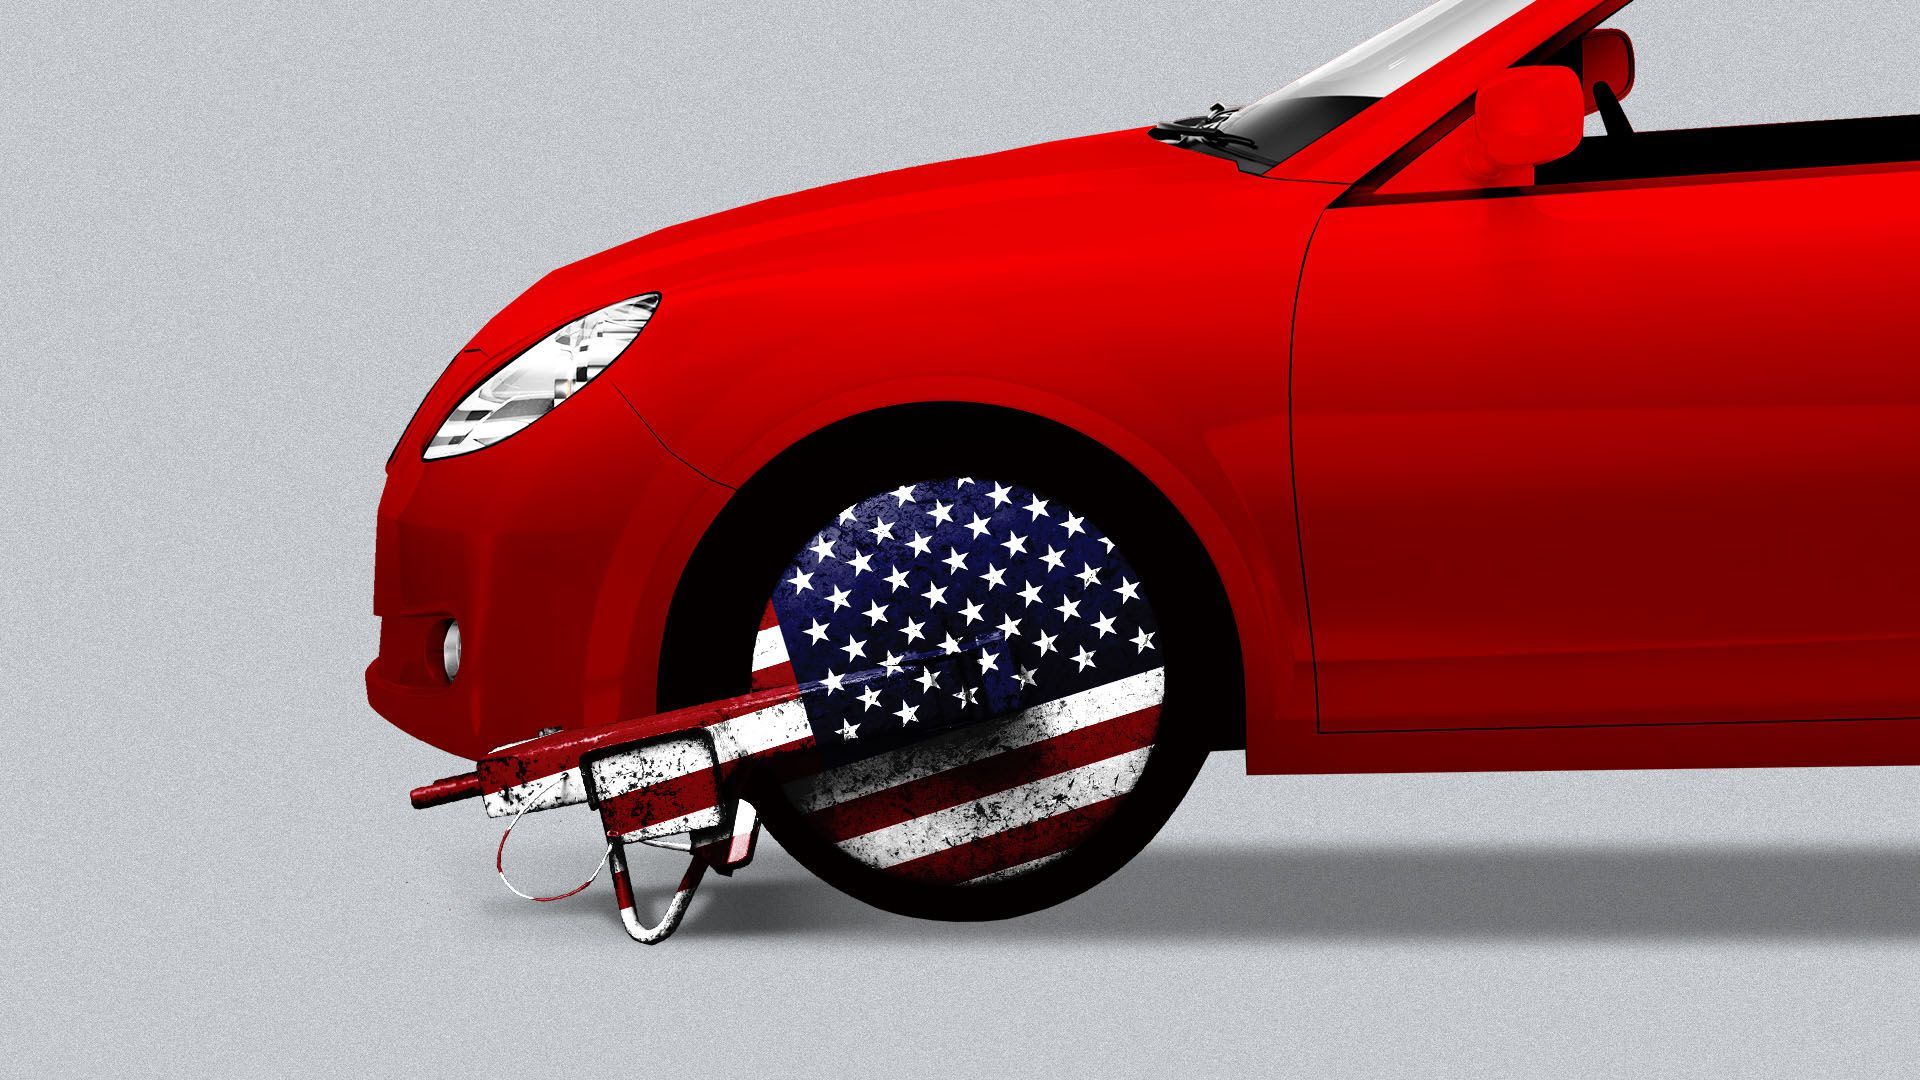 Photo of a car with a boot on the tire that's got the American flag printed on it